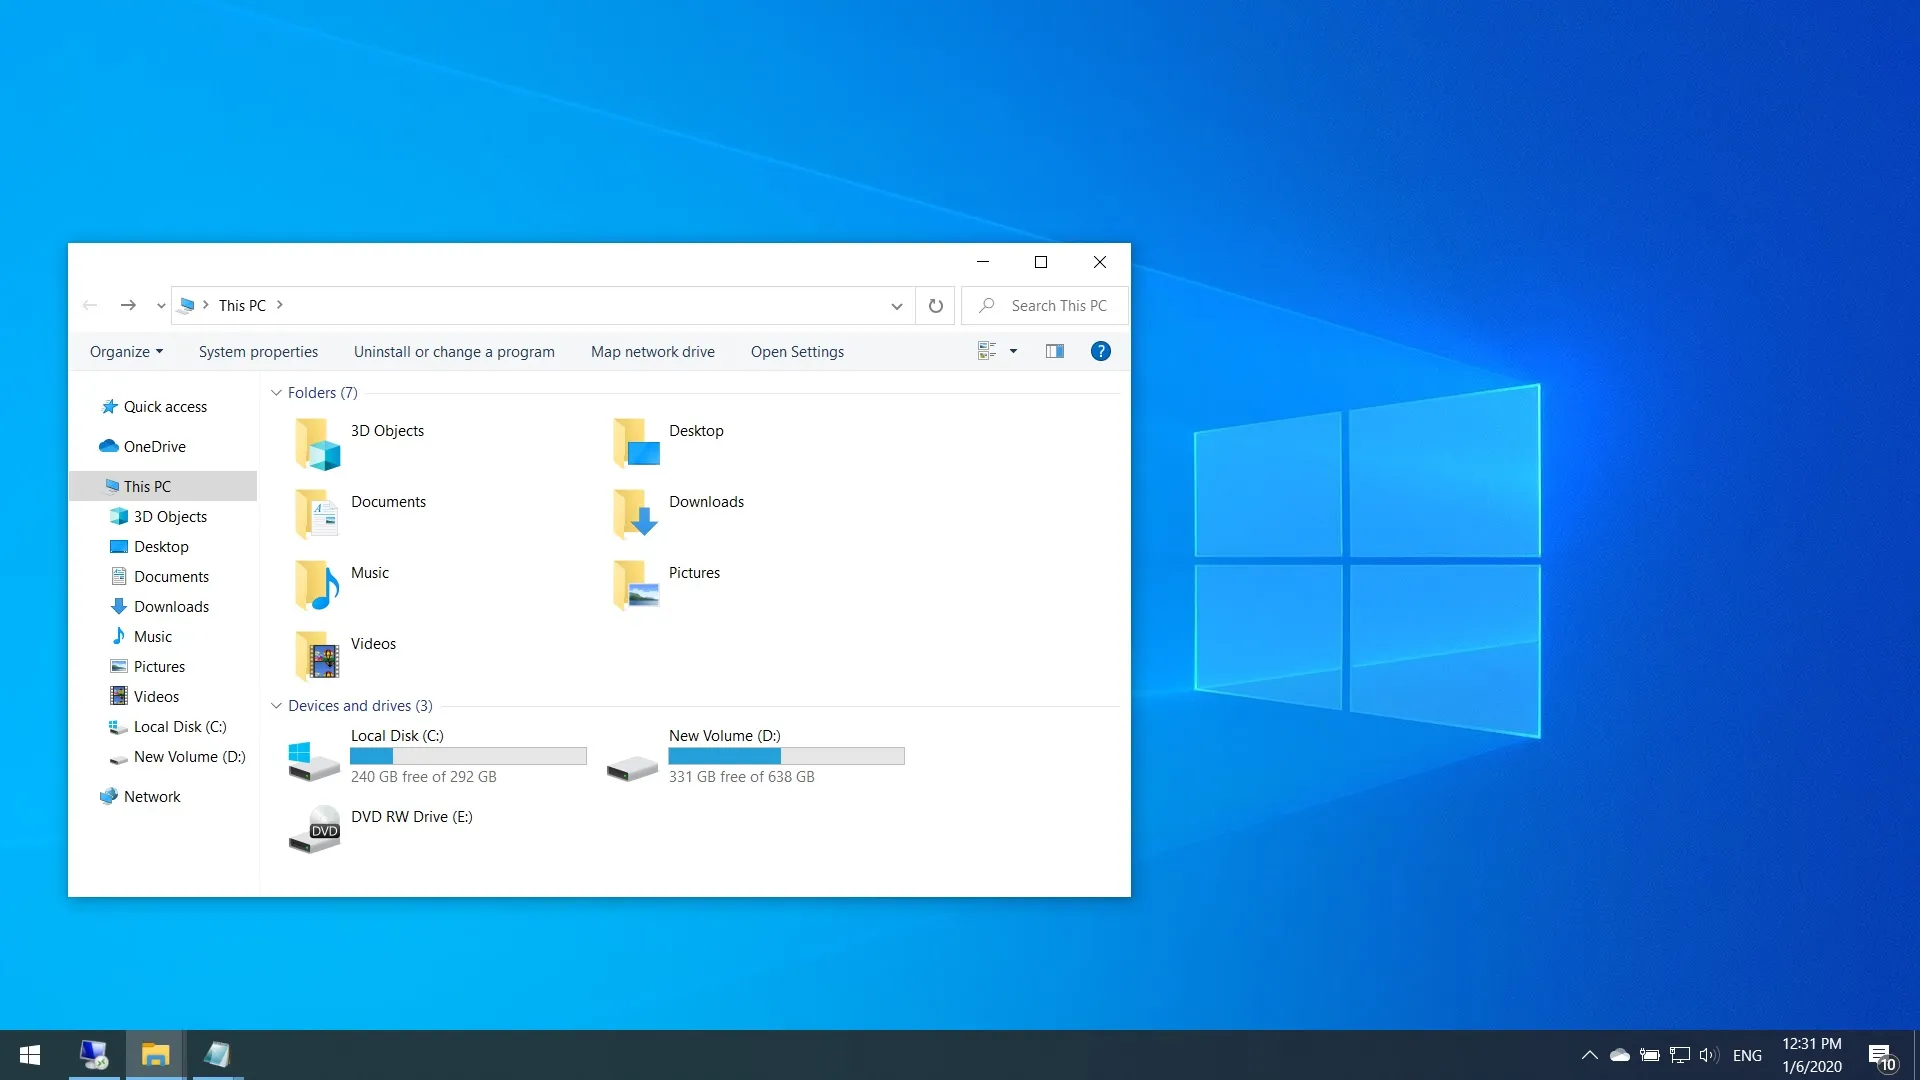 Turn Back Time How to Easily Get Your Windows 10 or 11 Looking Like the Classic Windows 7 or Vista-